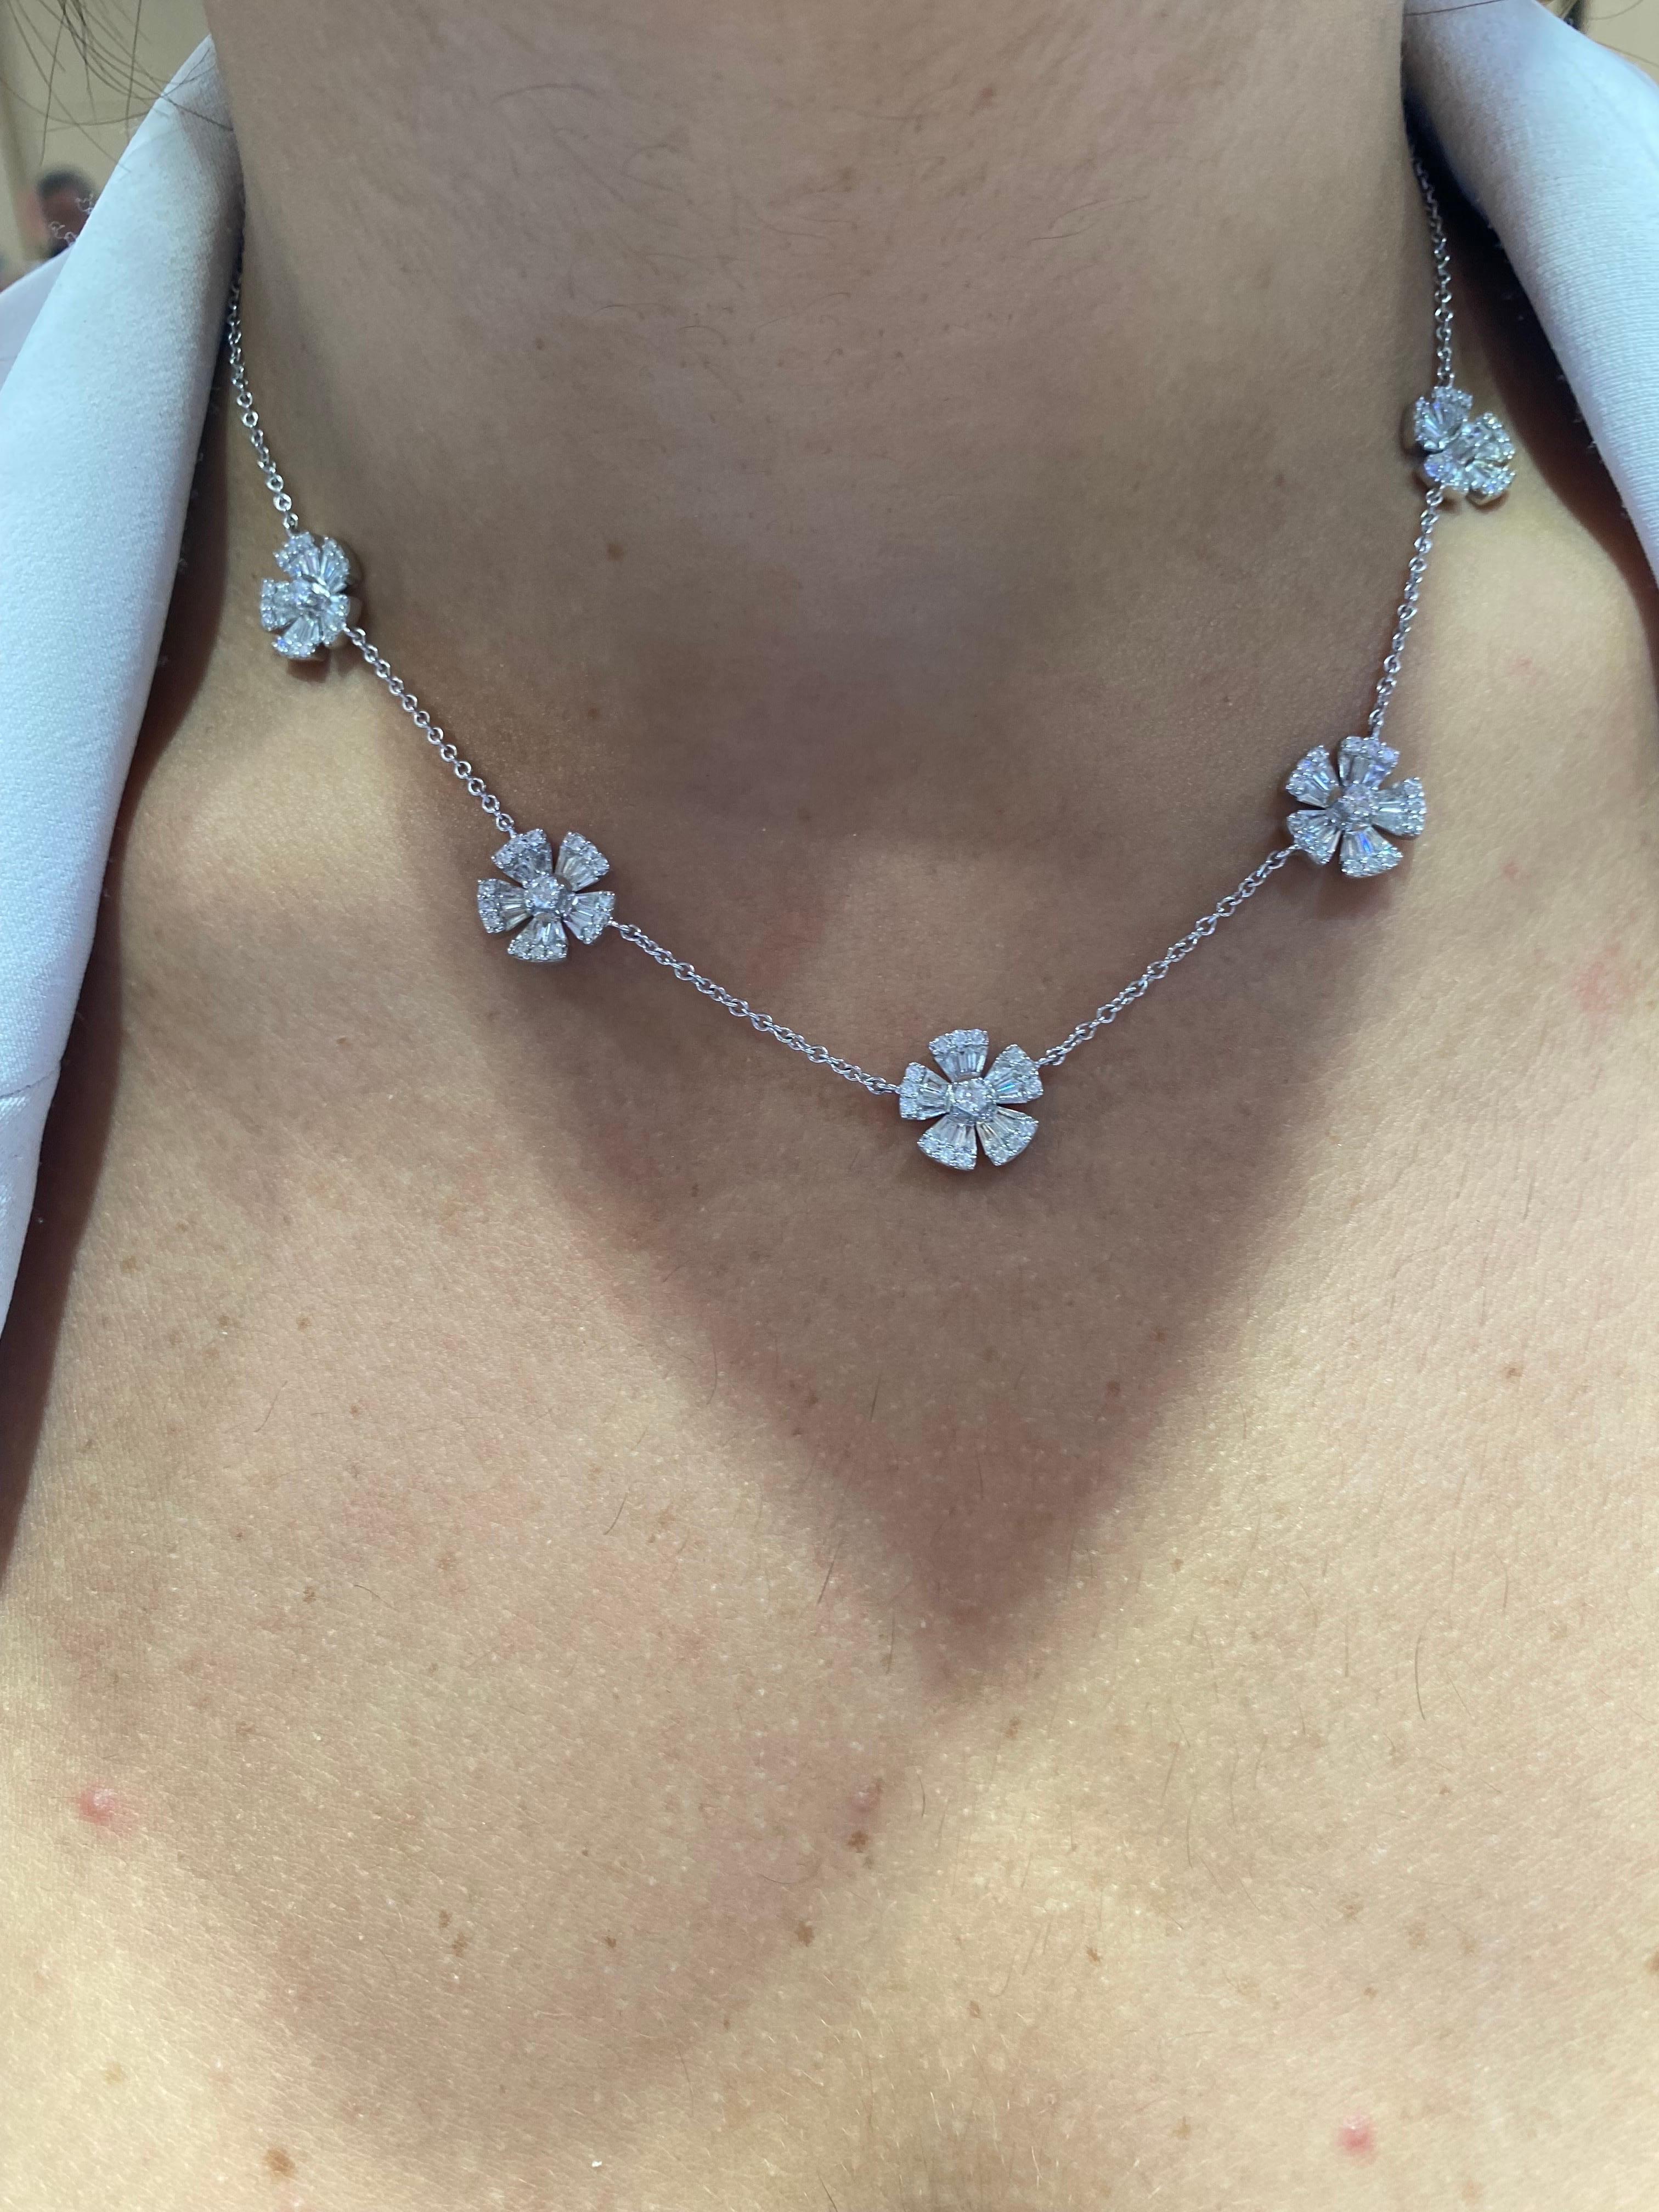 Diamond necklace set in 18K white gold. The necklace is set with 5 sections of baguette and round stones to create the illusion of a flower look. The total diamond weight of the piece is 2.62 carats. The color of the stones are F, the clarity is